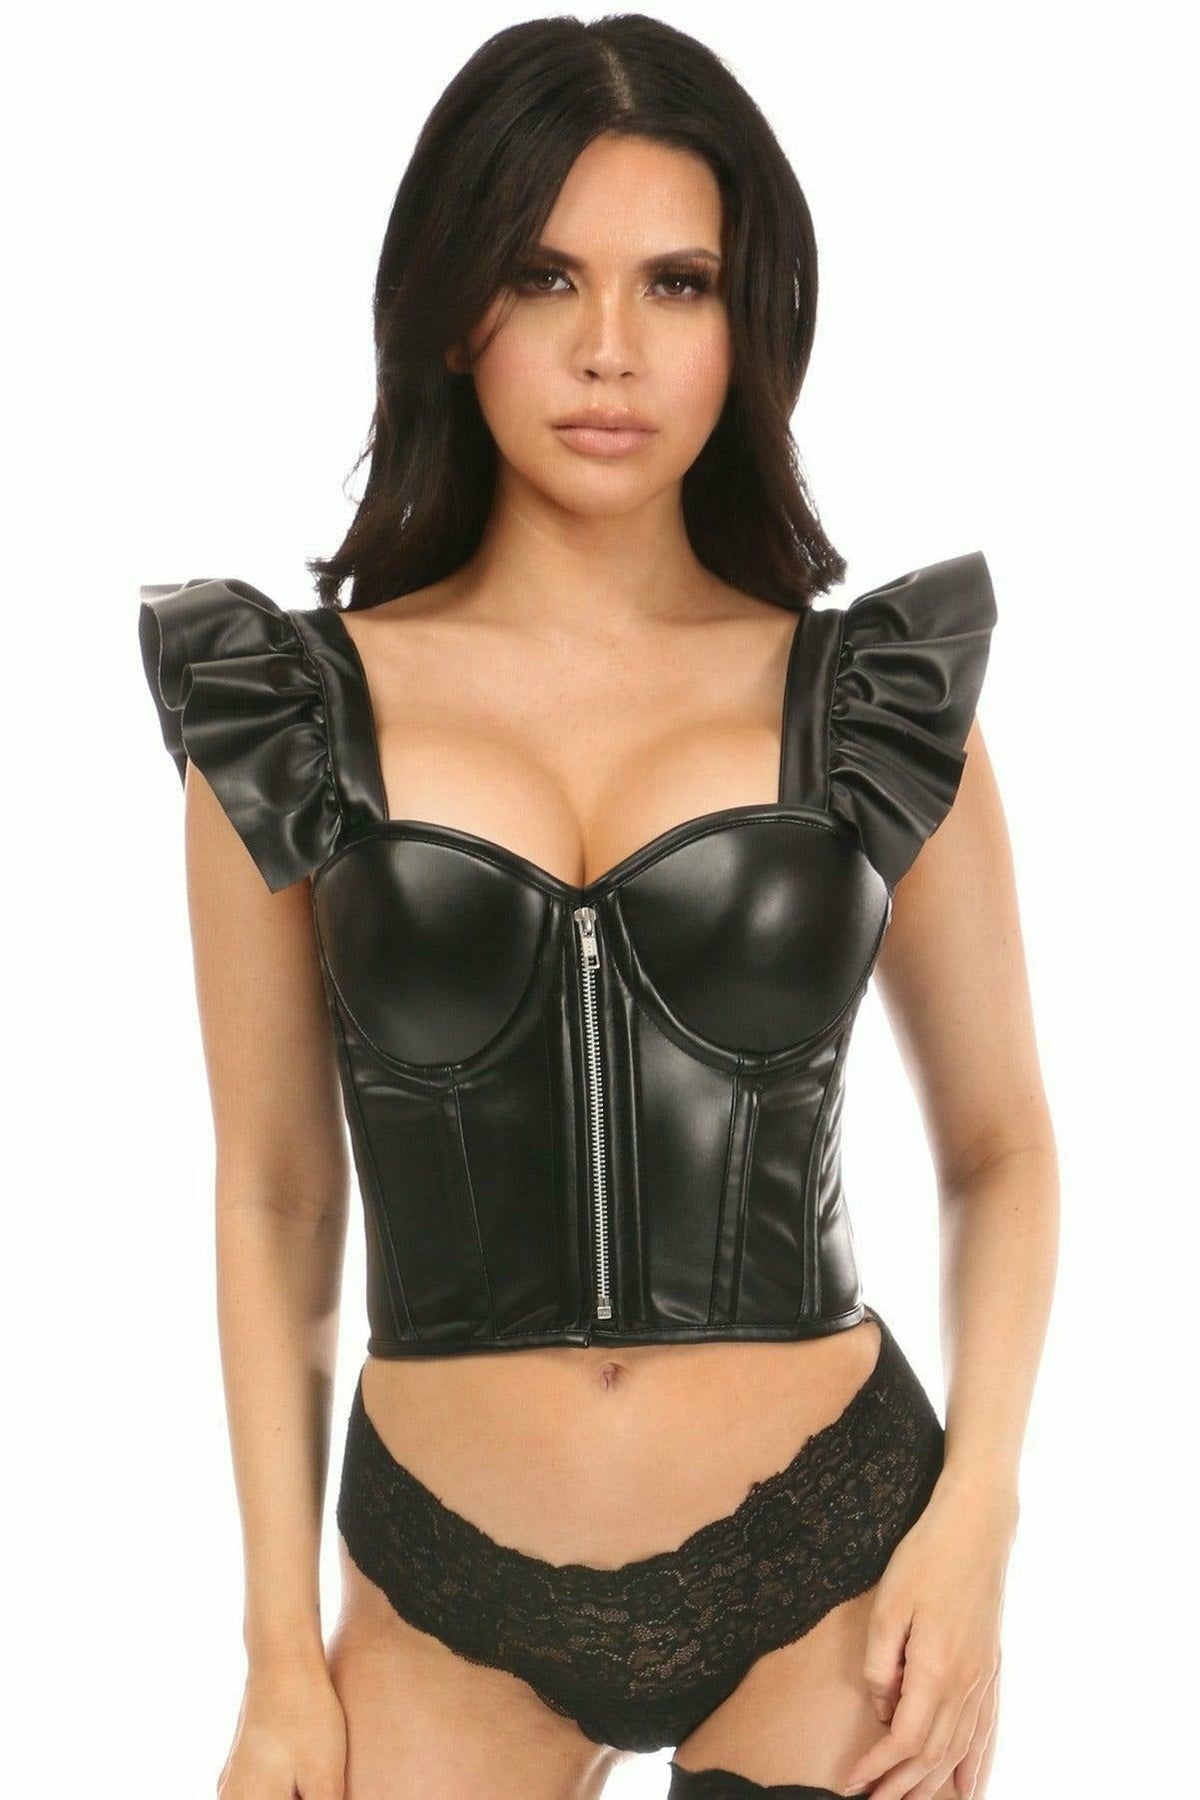 Daisy Corsets Lavish Black Faux Leather Bustier Top w/Ruffle Sleeves